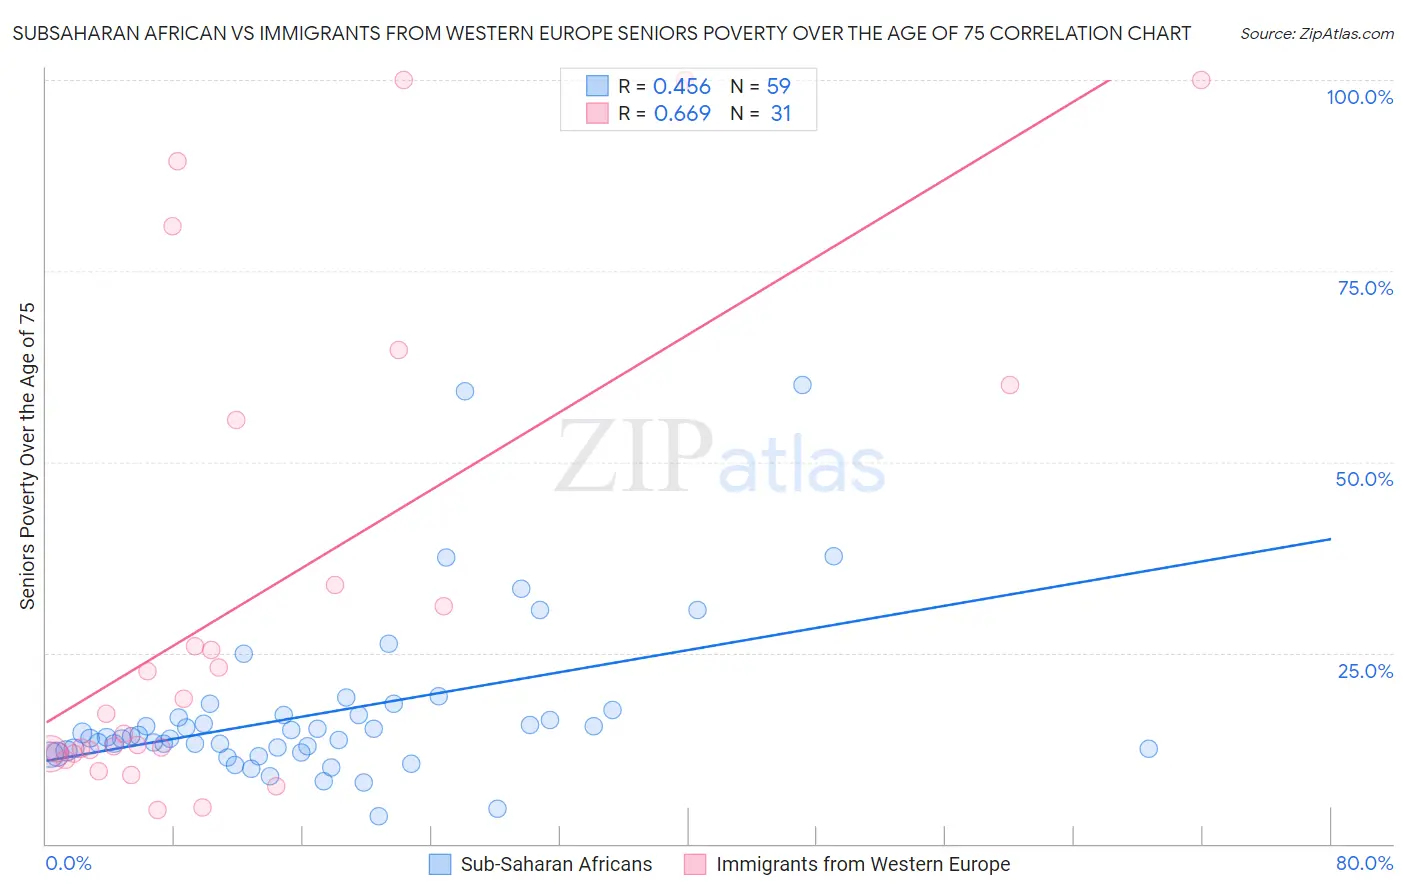 Subsaharan African vs Immigrants from Western Europe Seniors Poverty Over the Age of 75